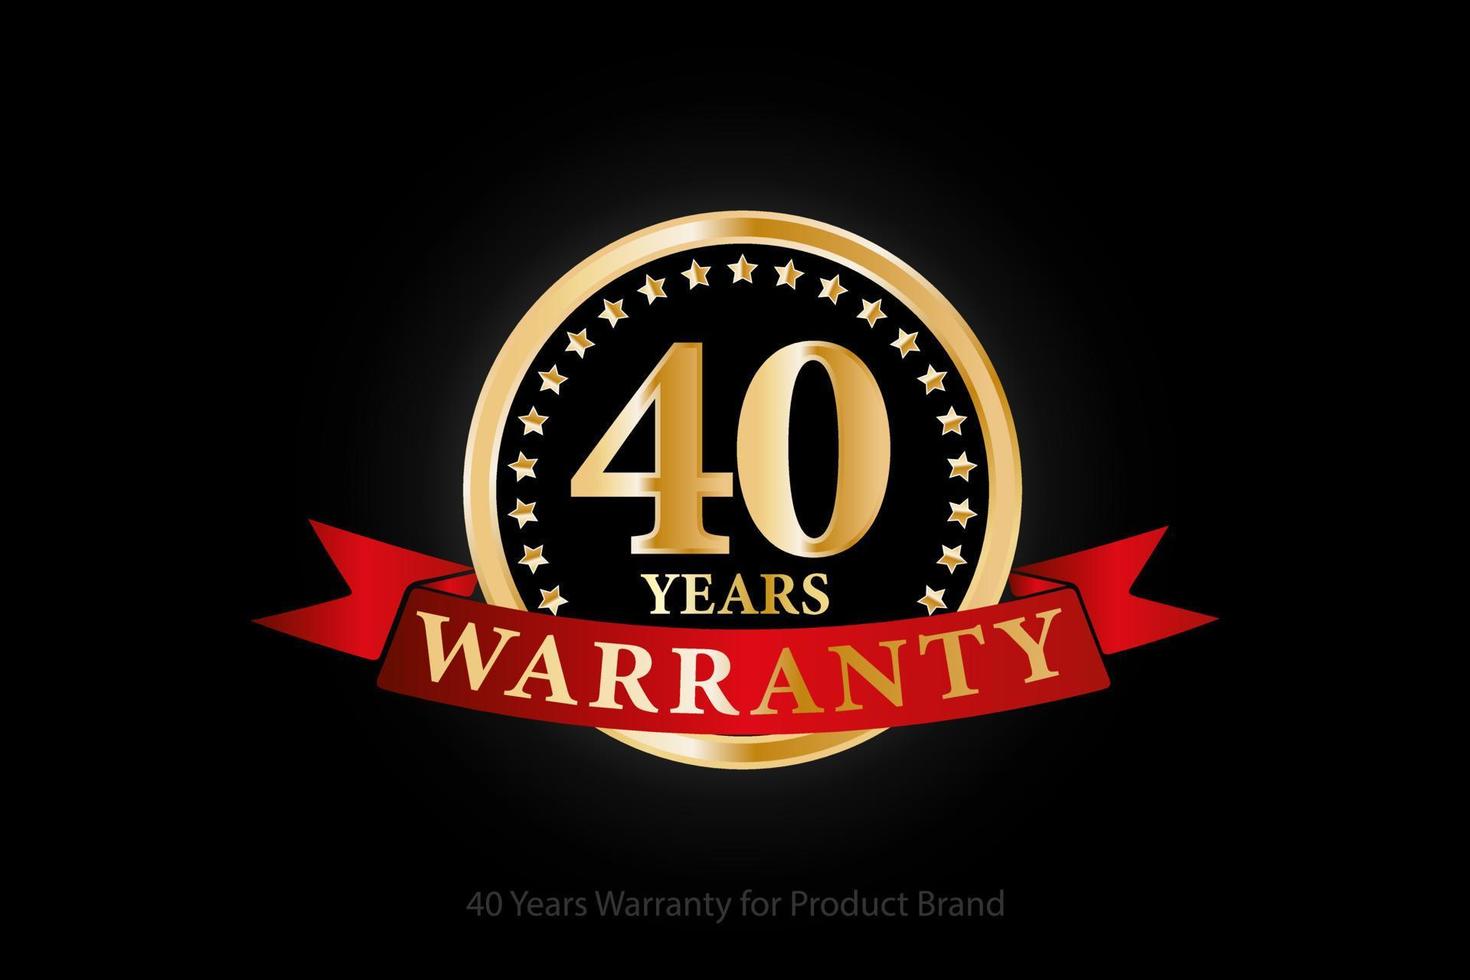 40 years golden warranty logo with ring and red ribbon isolated on black background, vector design for product warranty, guarantee, service, corporate, and your business.